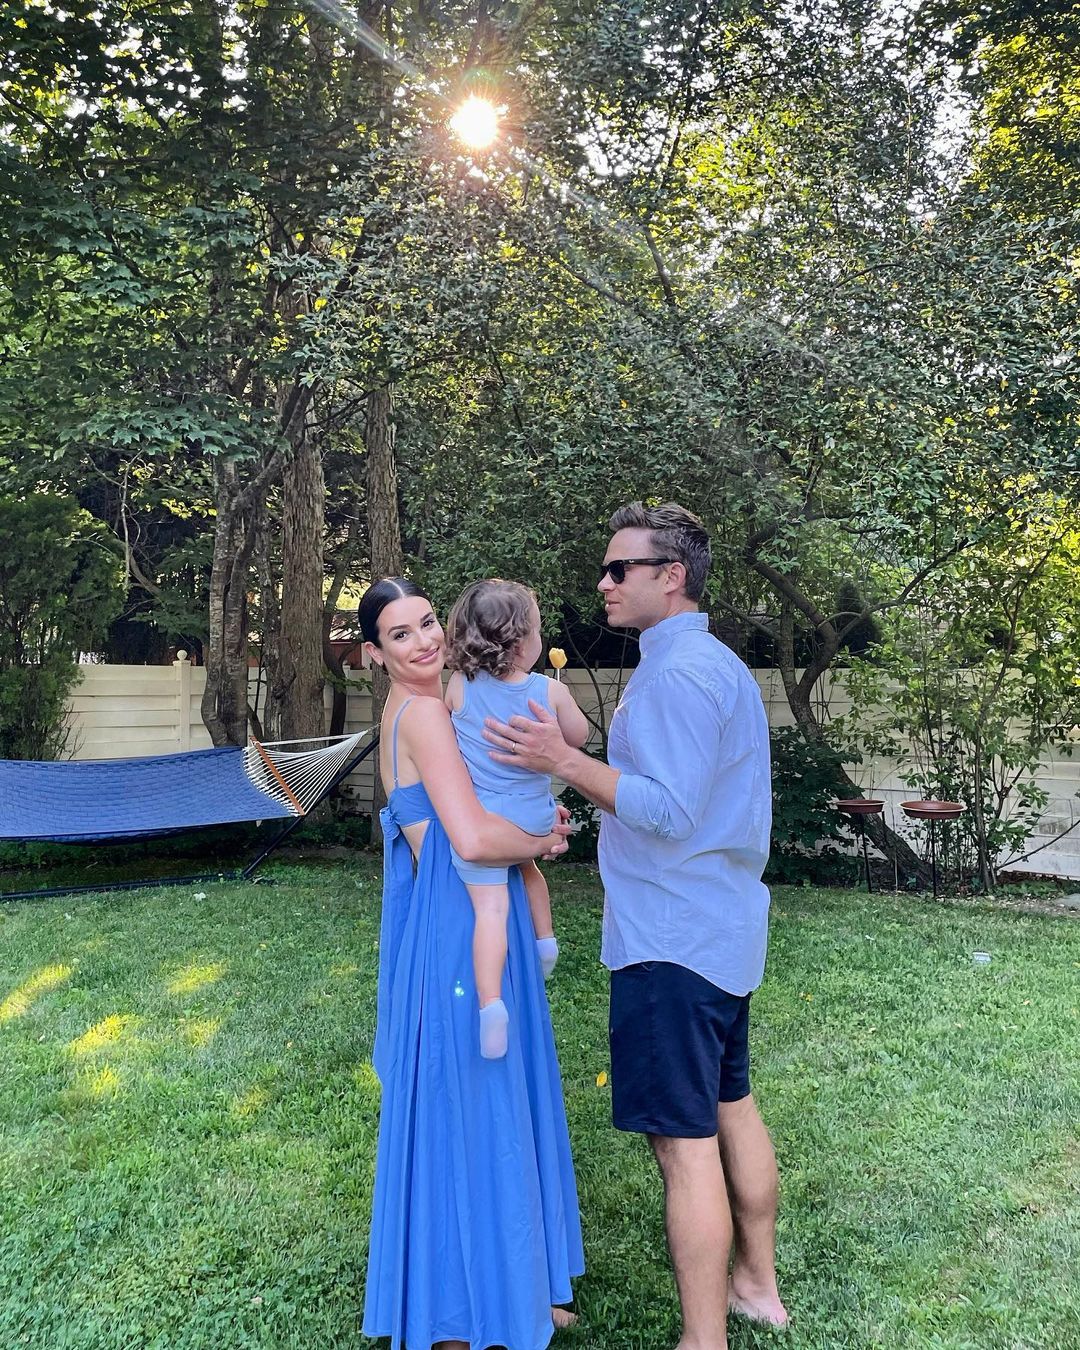 Lea gave birth to her first child, Ever Leo, on August 20, 2020